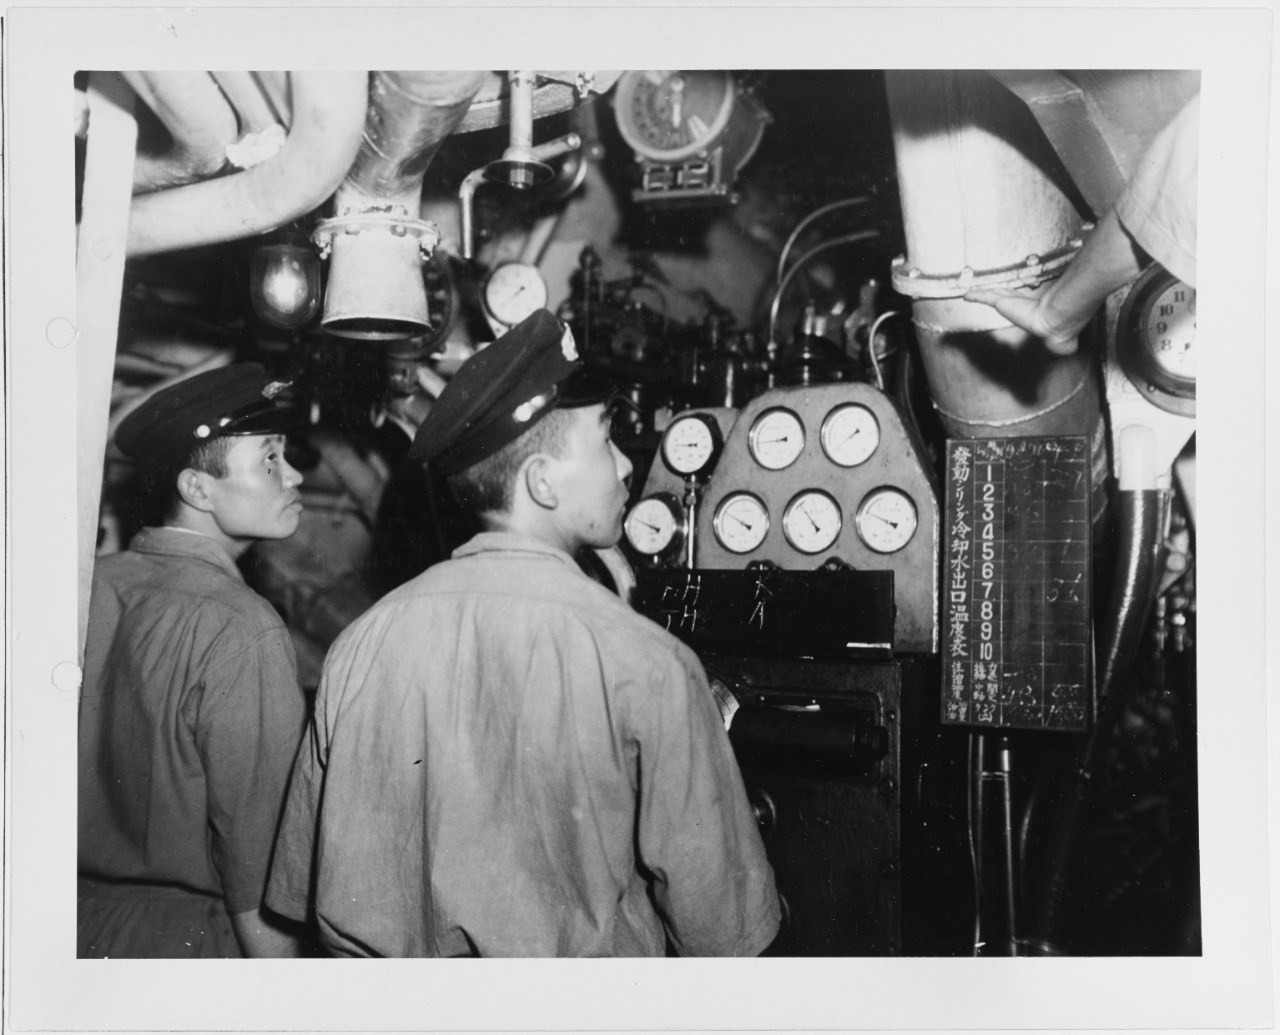 Men stand in Port Auxiliary Engine Room I-14 inside Japanese Submarine